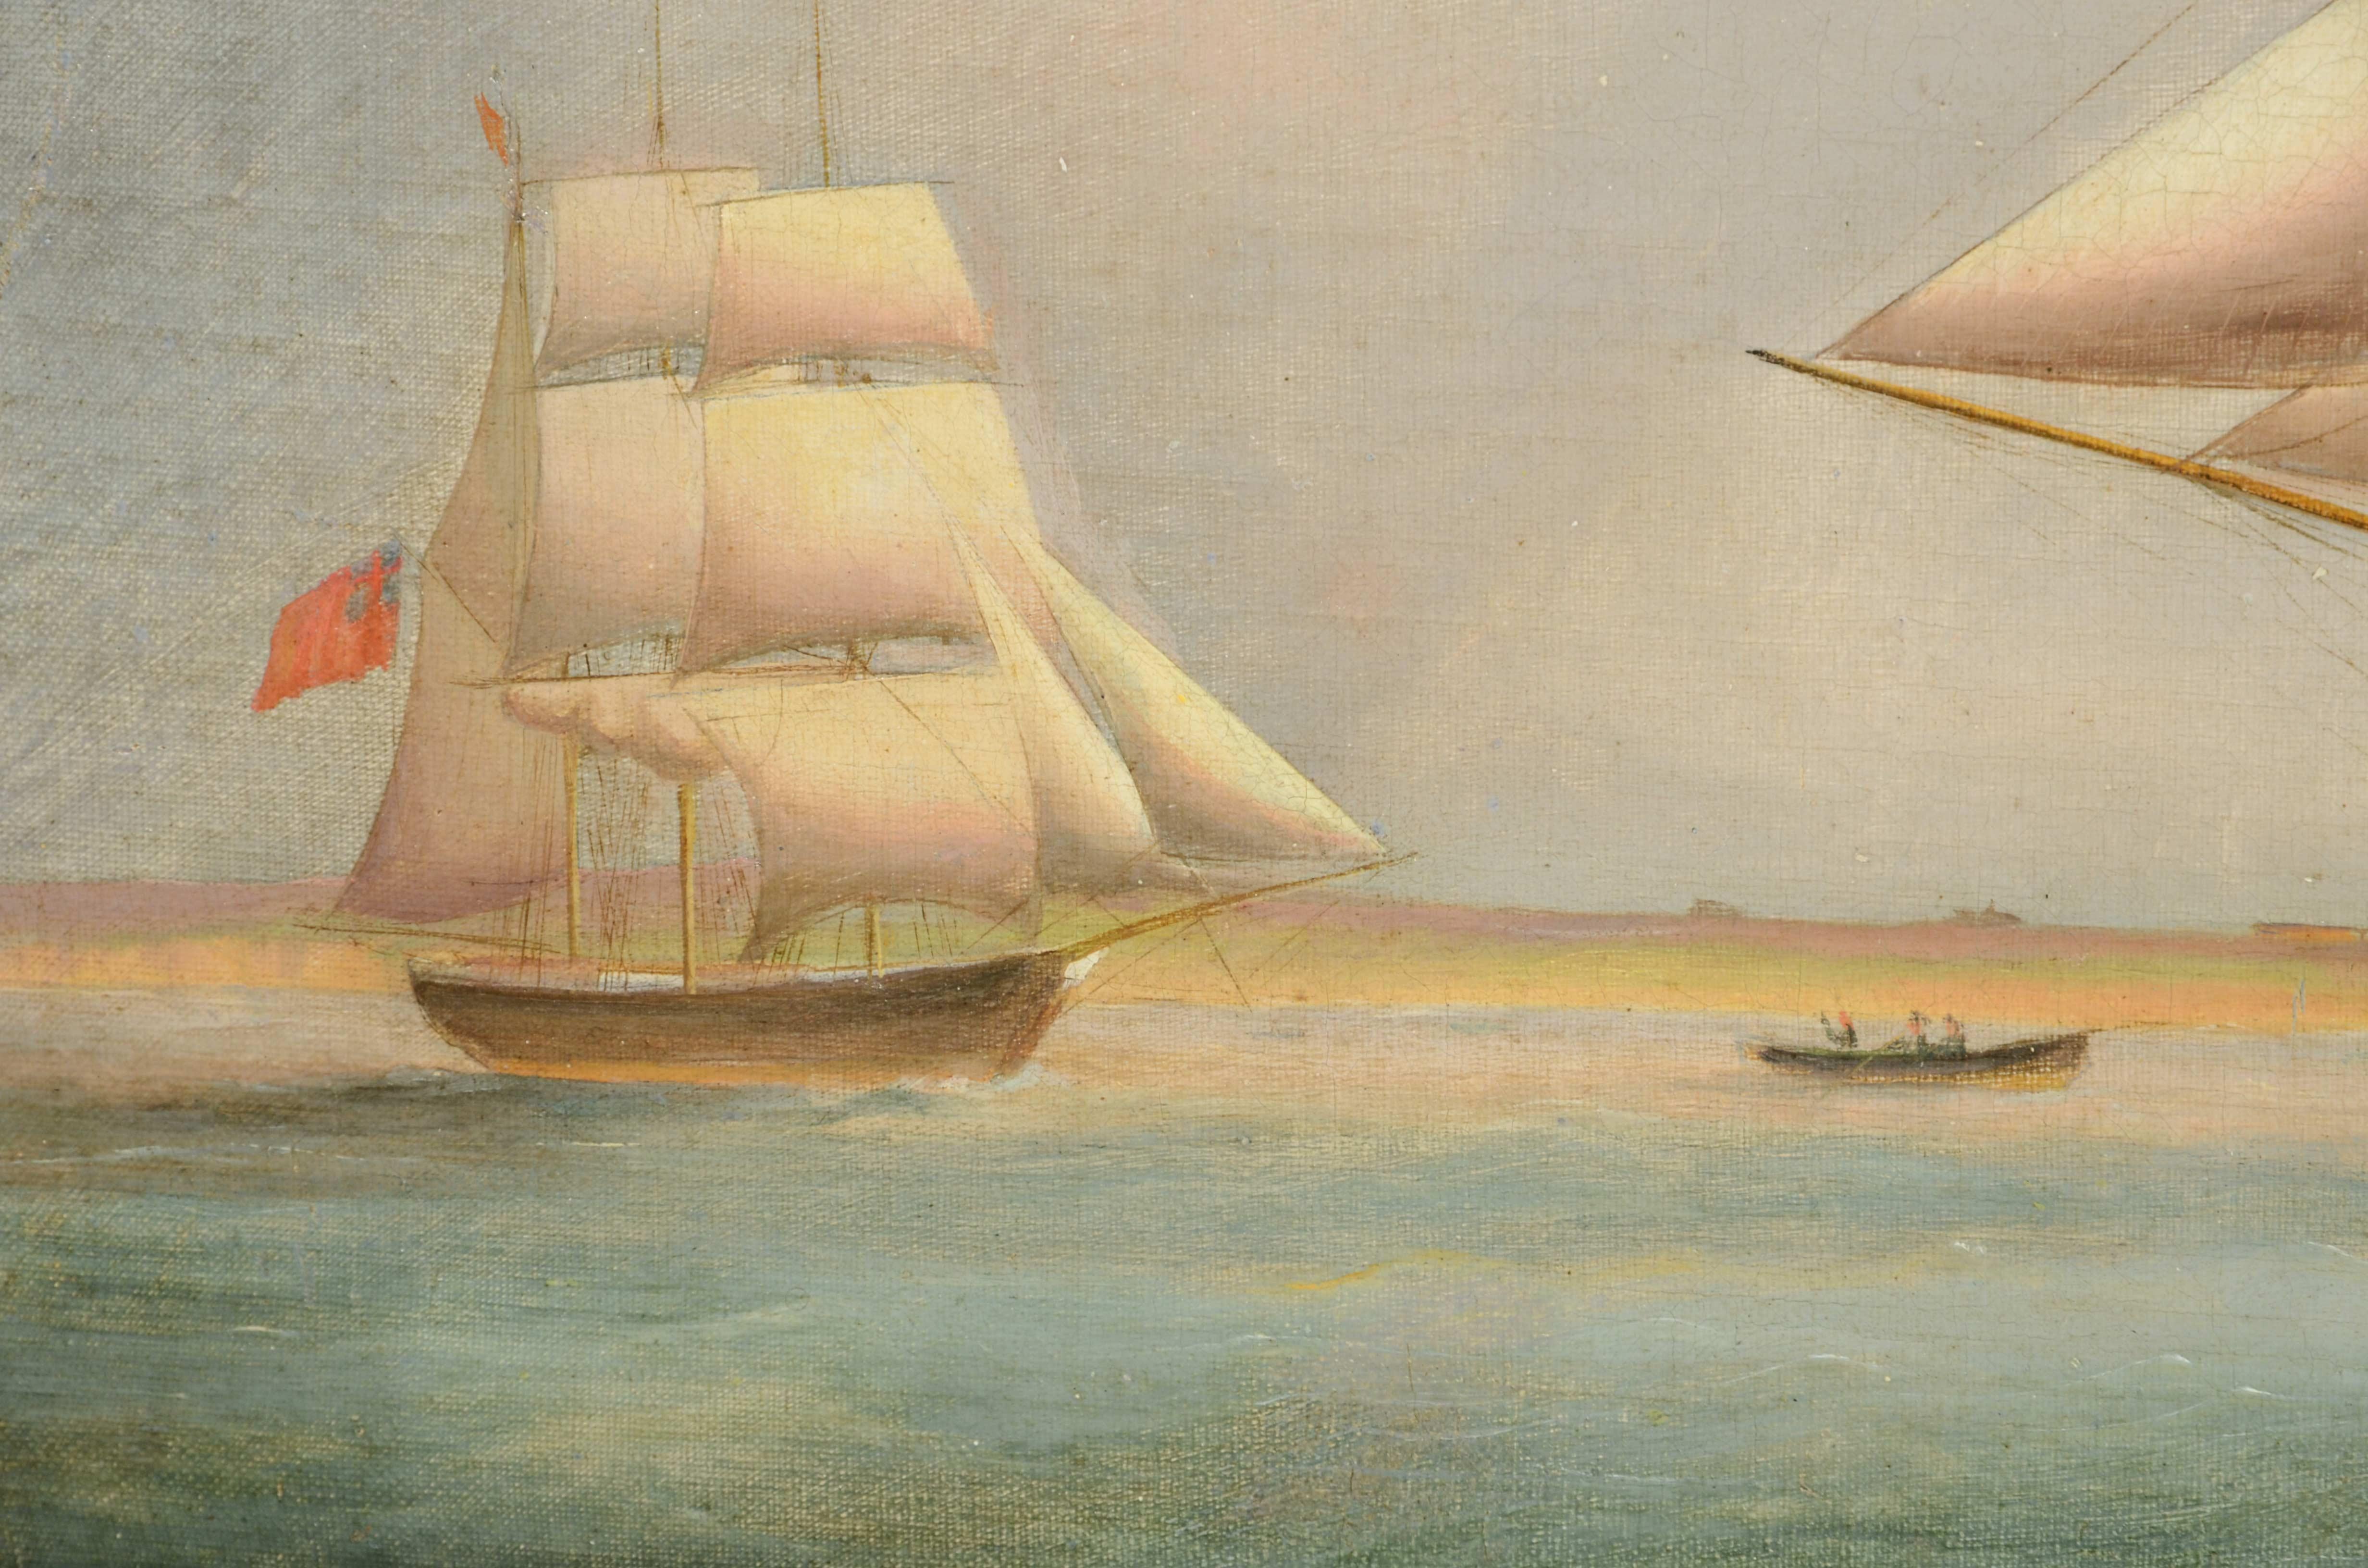 Oil on canvas, antique portrait of a ship dating from the first half of the 19th century. For Sale 5